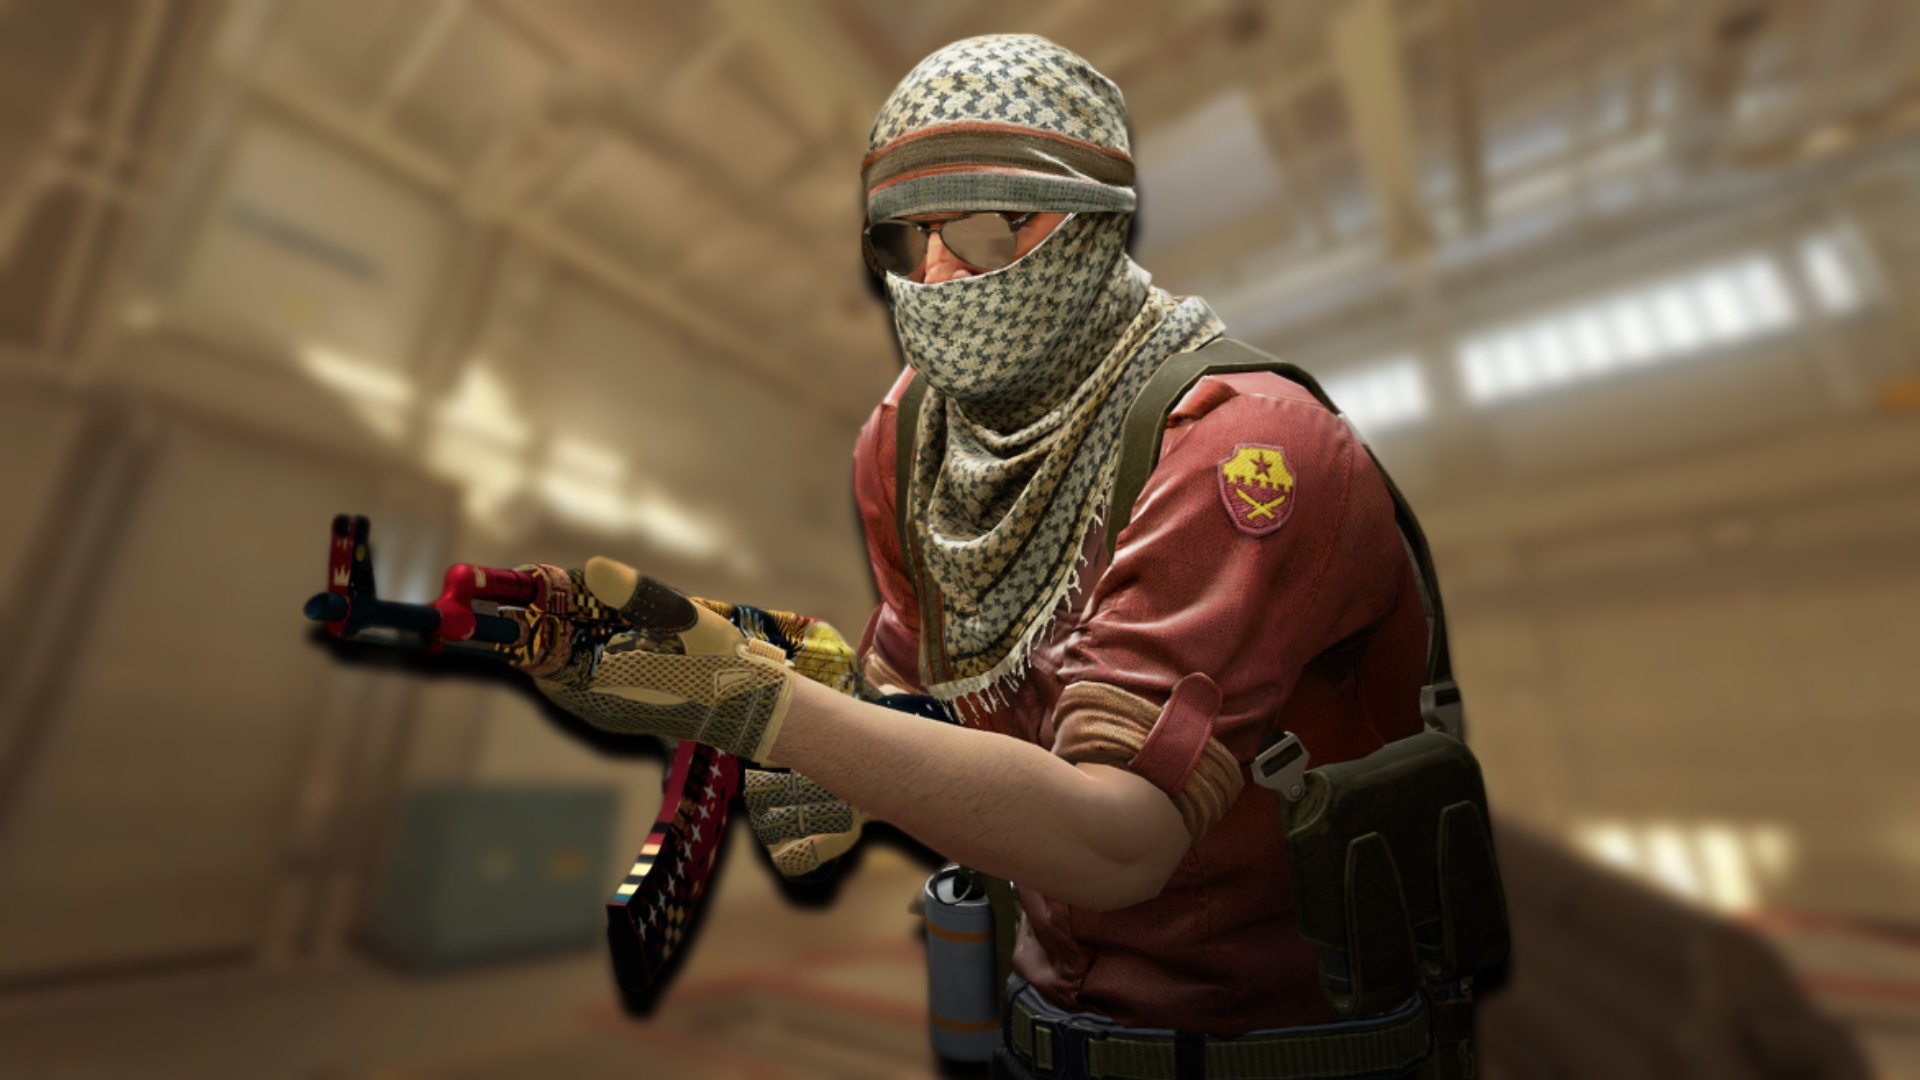 Is Counter-Strike 2 Free-to-Play?